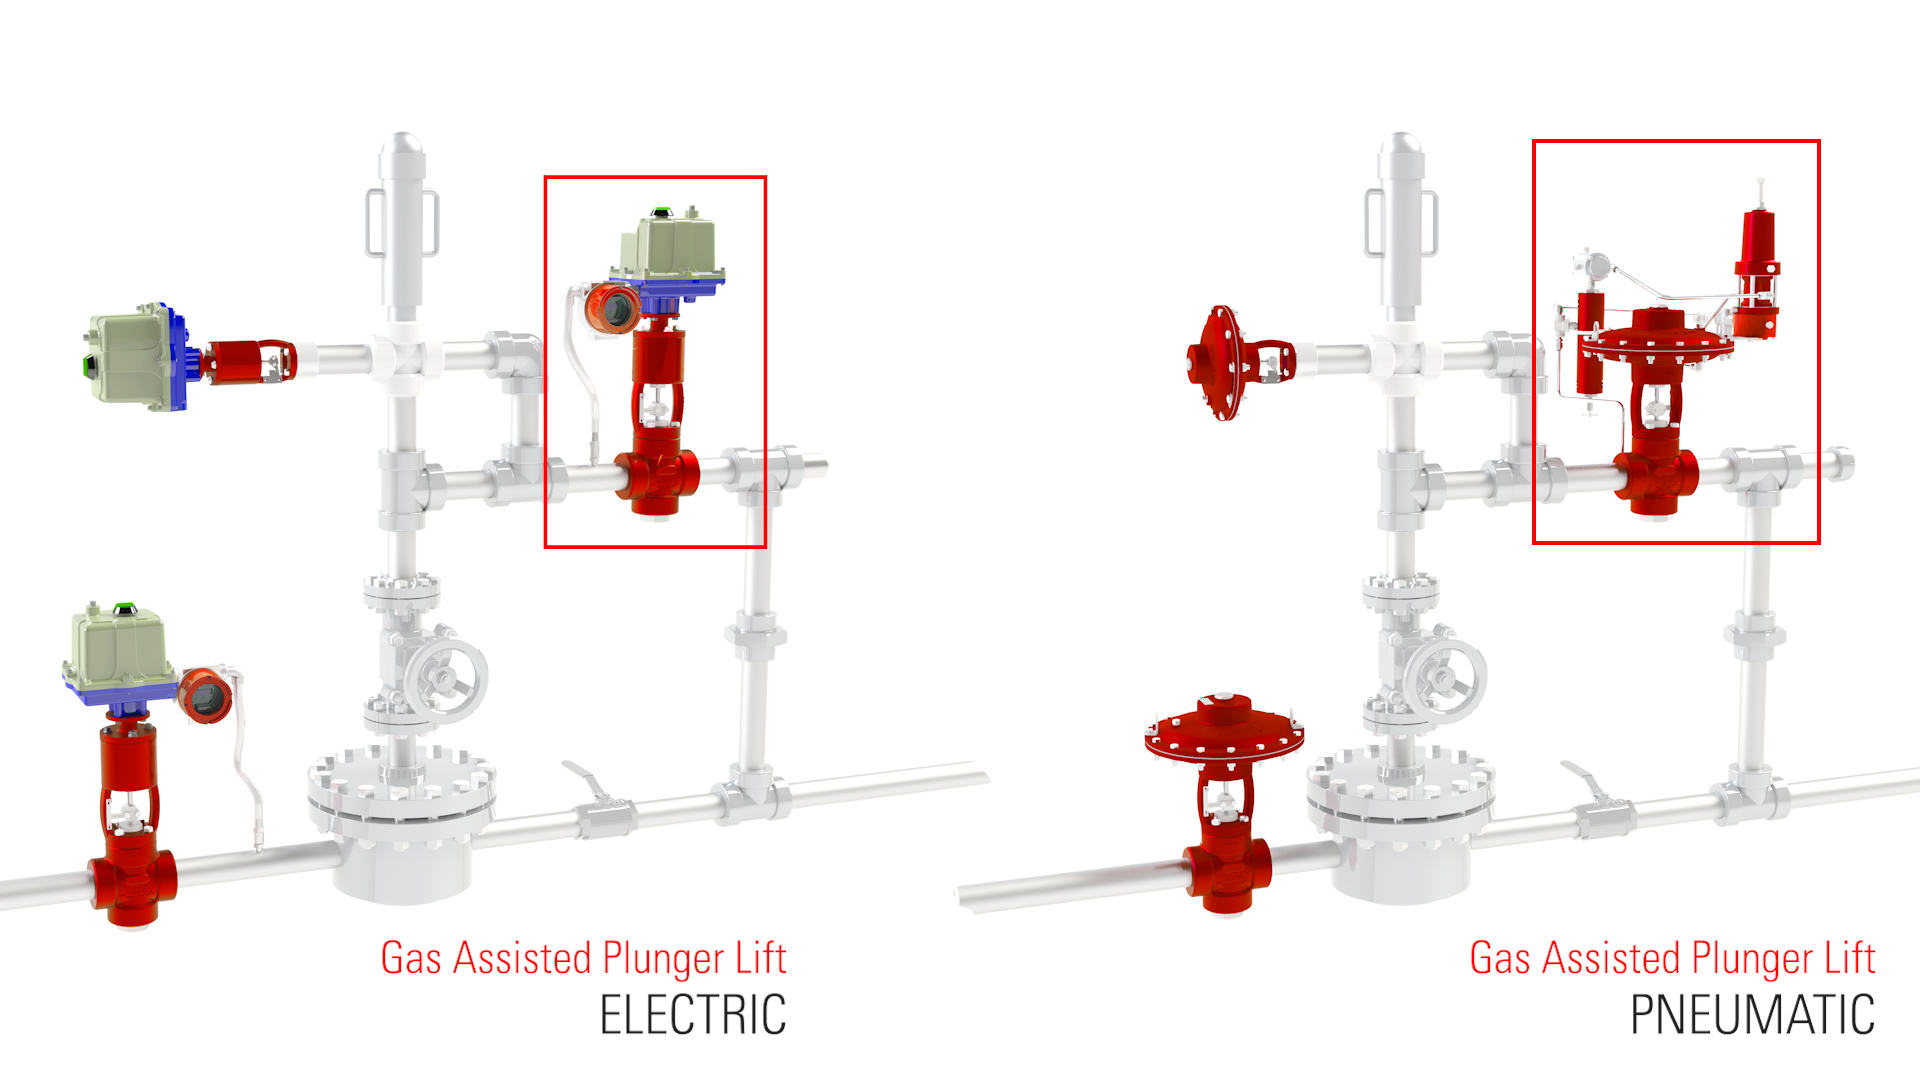 Gas Assisted Plunger Lift Electric and Pneumatic Options /></p>

<p>Once the controller opens the valve, the plunger and the column of fluid will start their journey to the surface while being pushed by the pressurized well gases. At the surface, this fluid exits through the control valve and moves downstream to production equipment.</p>

<p>From the time the plunger arrives in the lubricator to when the control valve closes is known as 